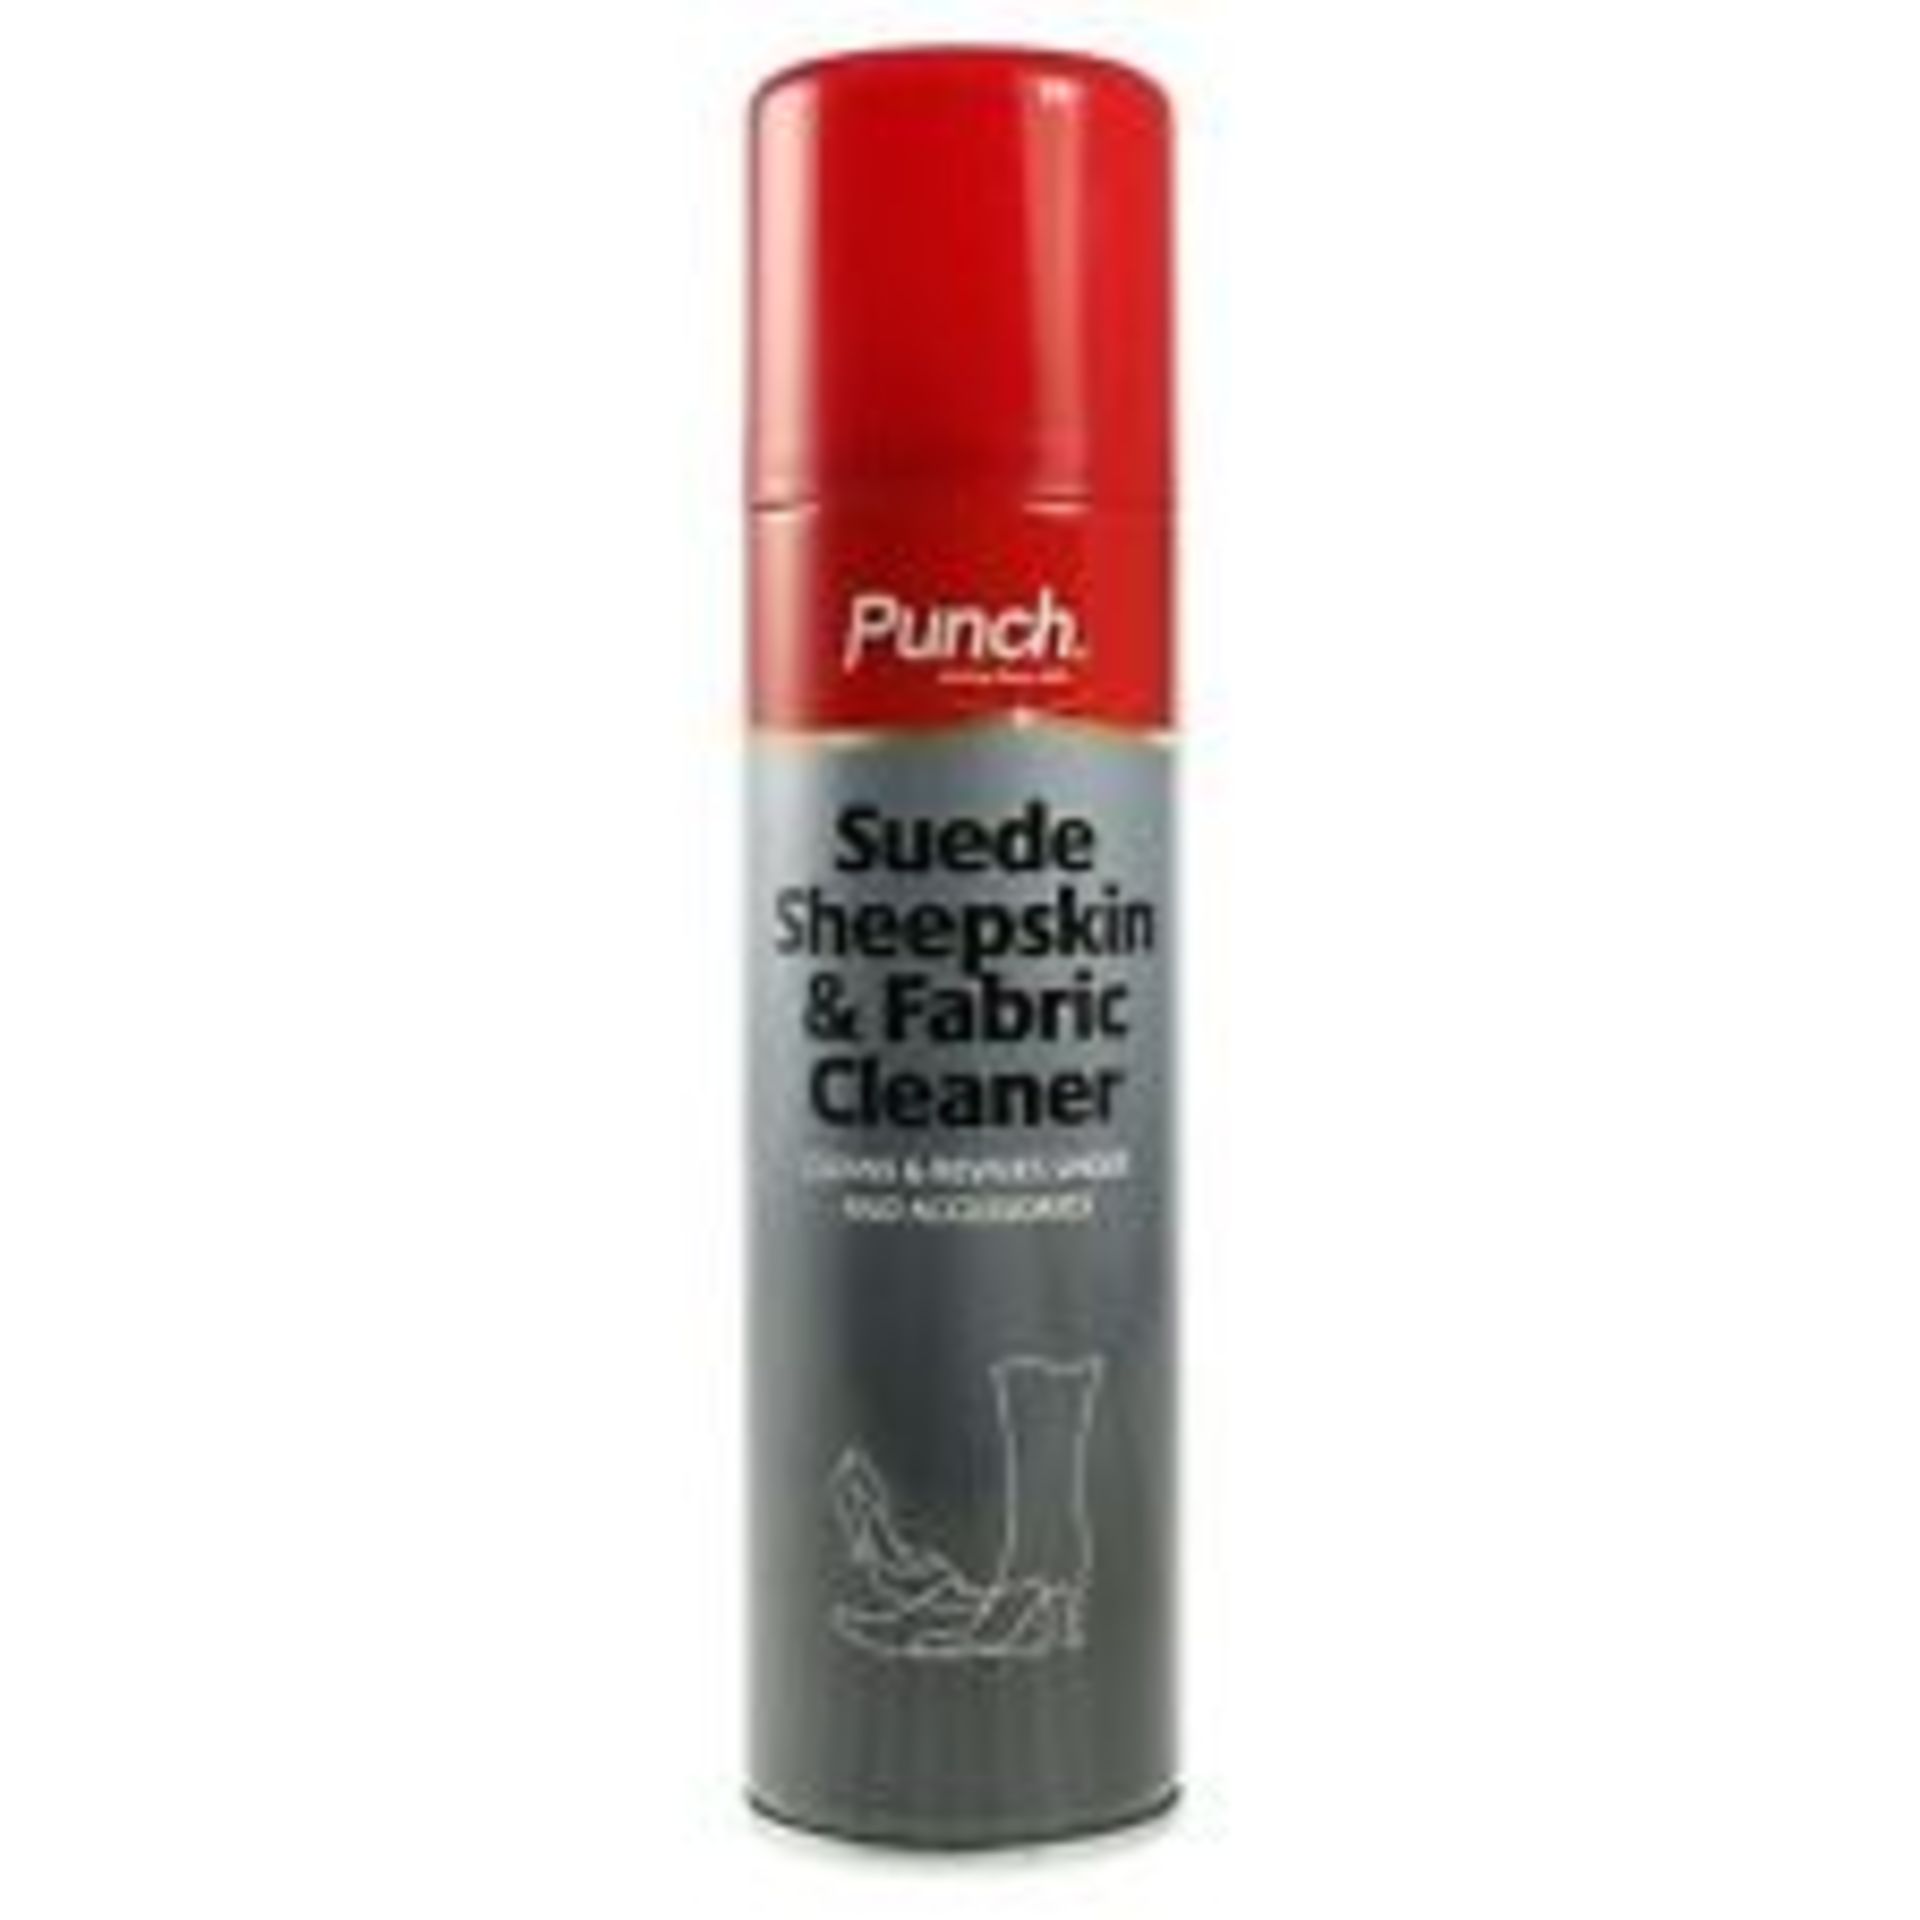 V Brand New Six 200ml Cans Punch Suede & Fabric Shampoo (Photo May Vary From Product) ISP £30 X 2